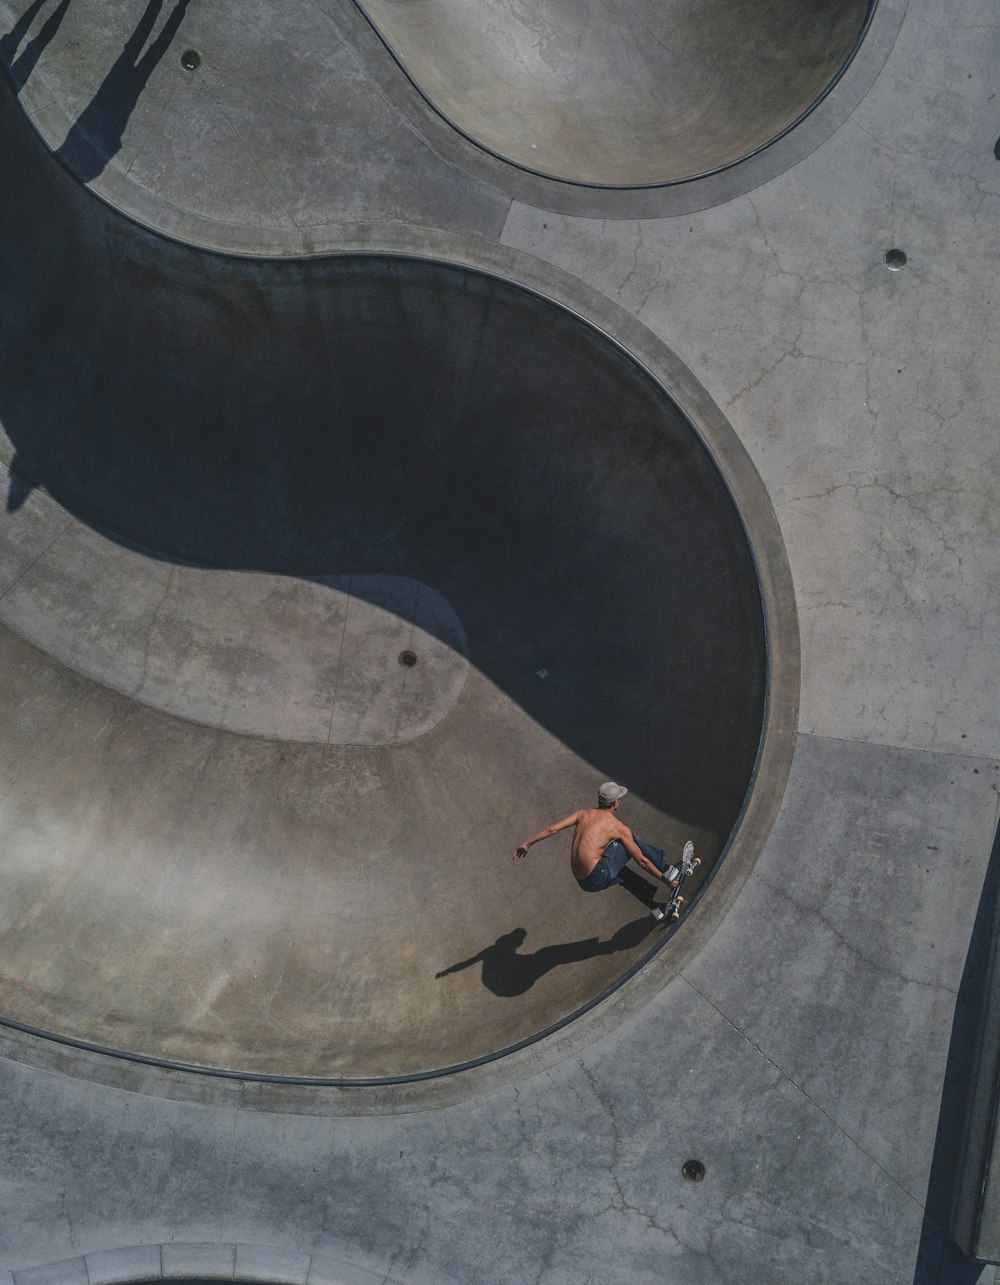 aerial view of man riding skateboard